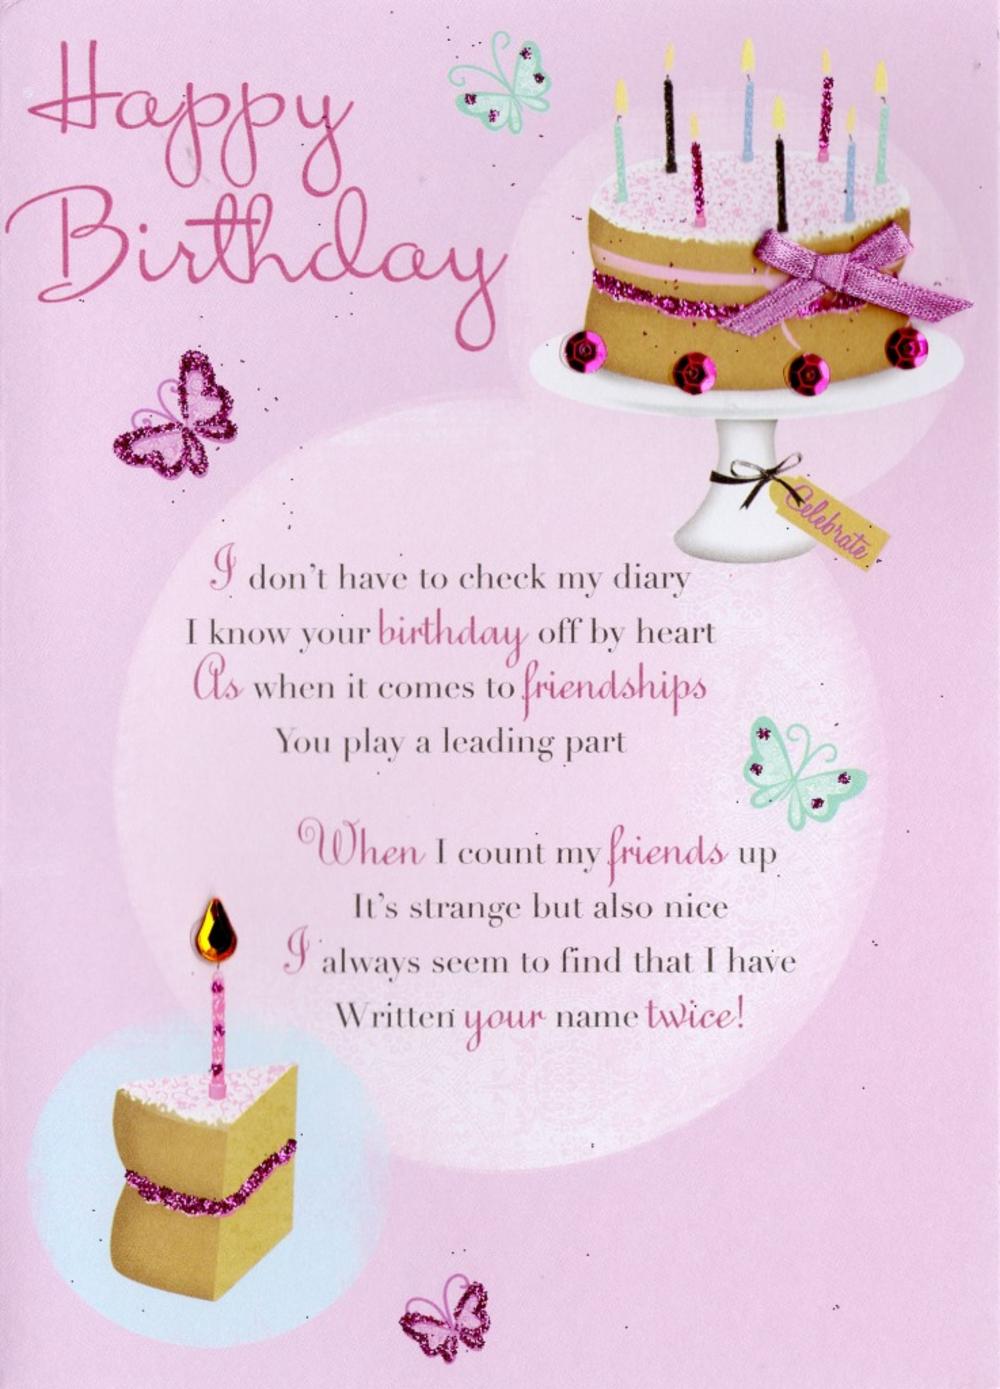 happy-birthday-images-for-friend-free-beautiful-bday-cards-and